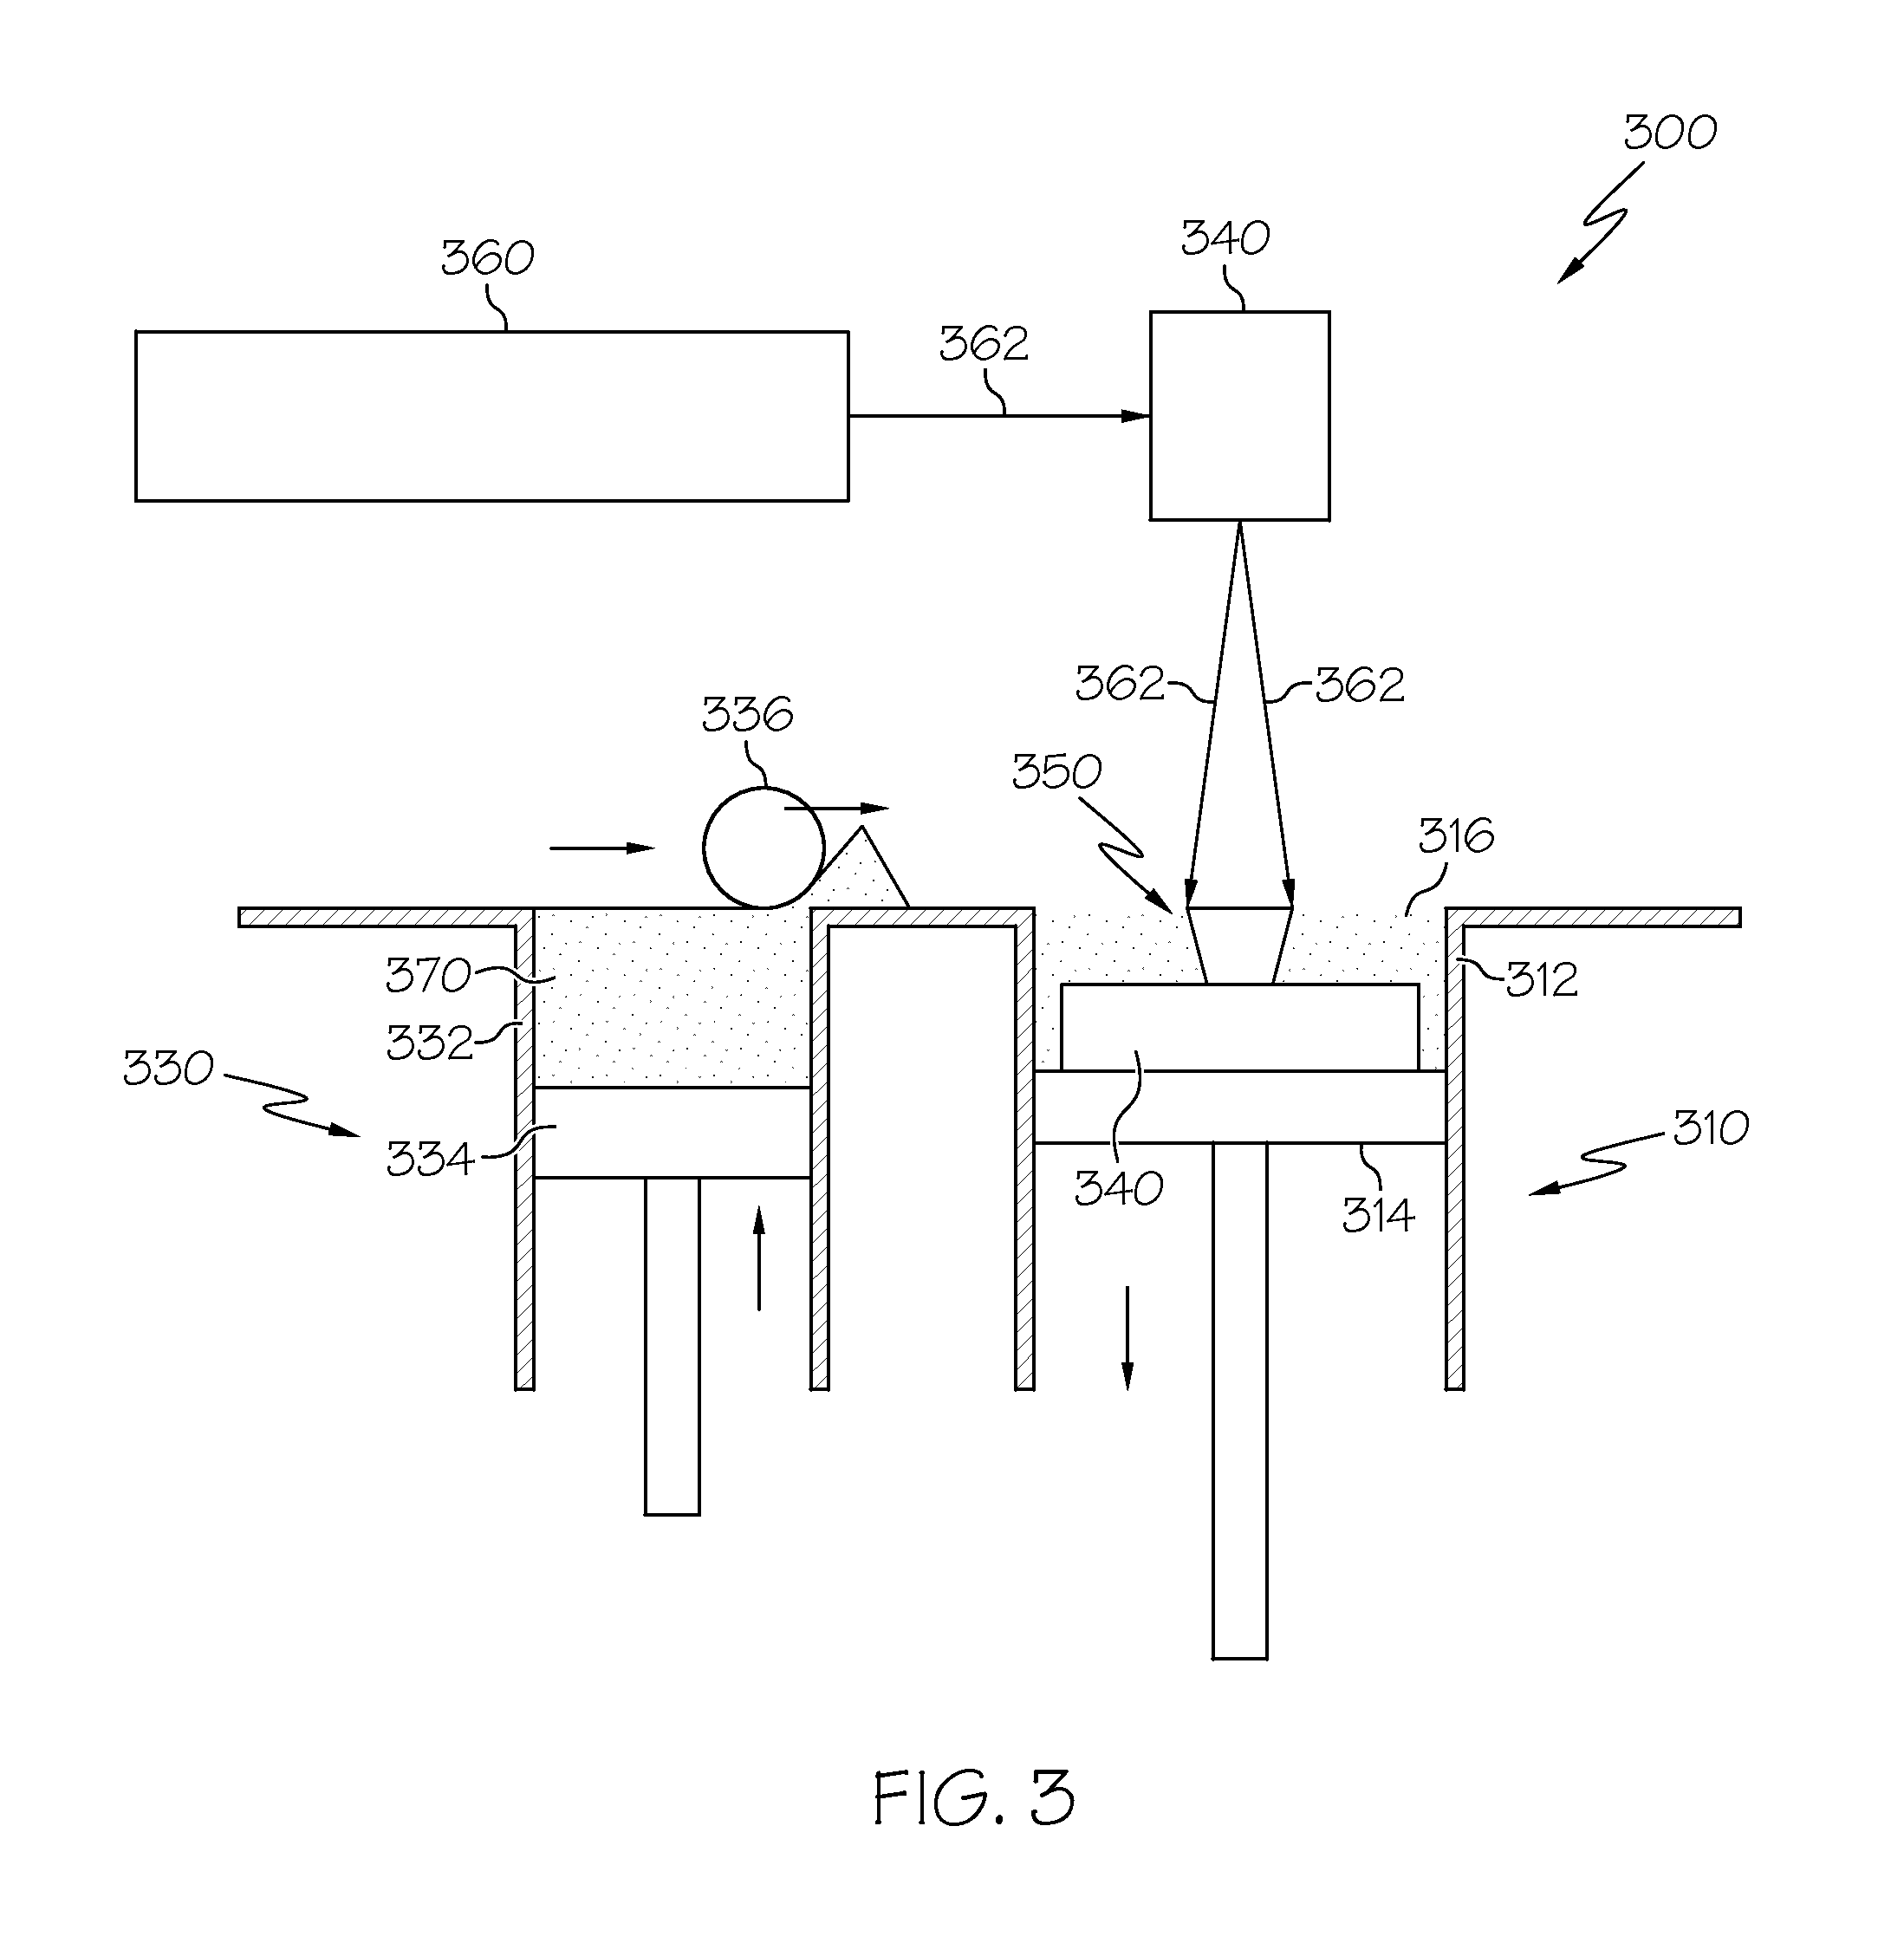 Methods for forming oxide dispersion-strengthened alloys